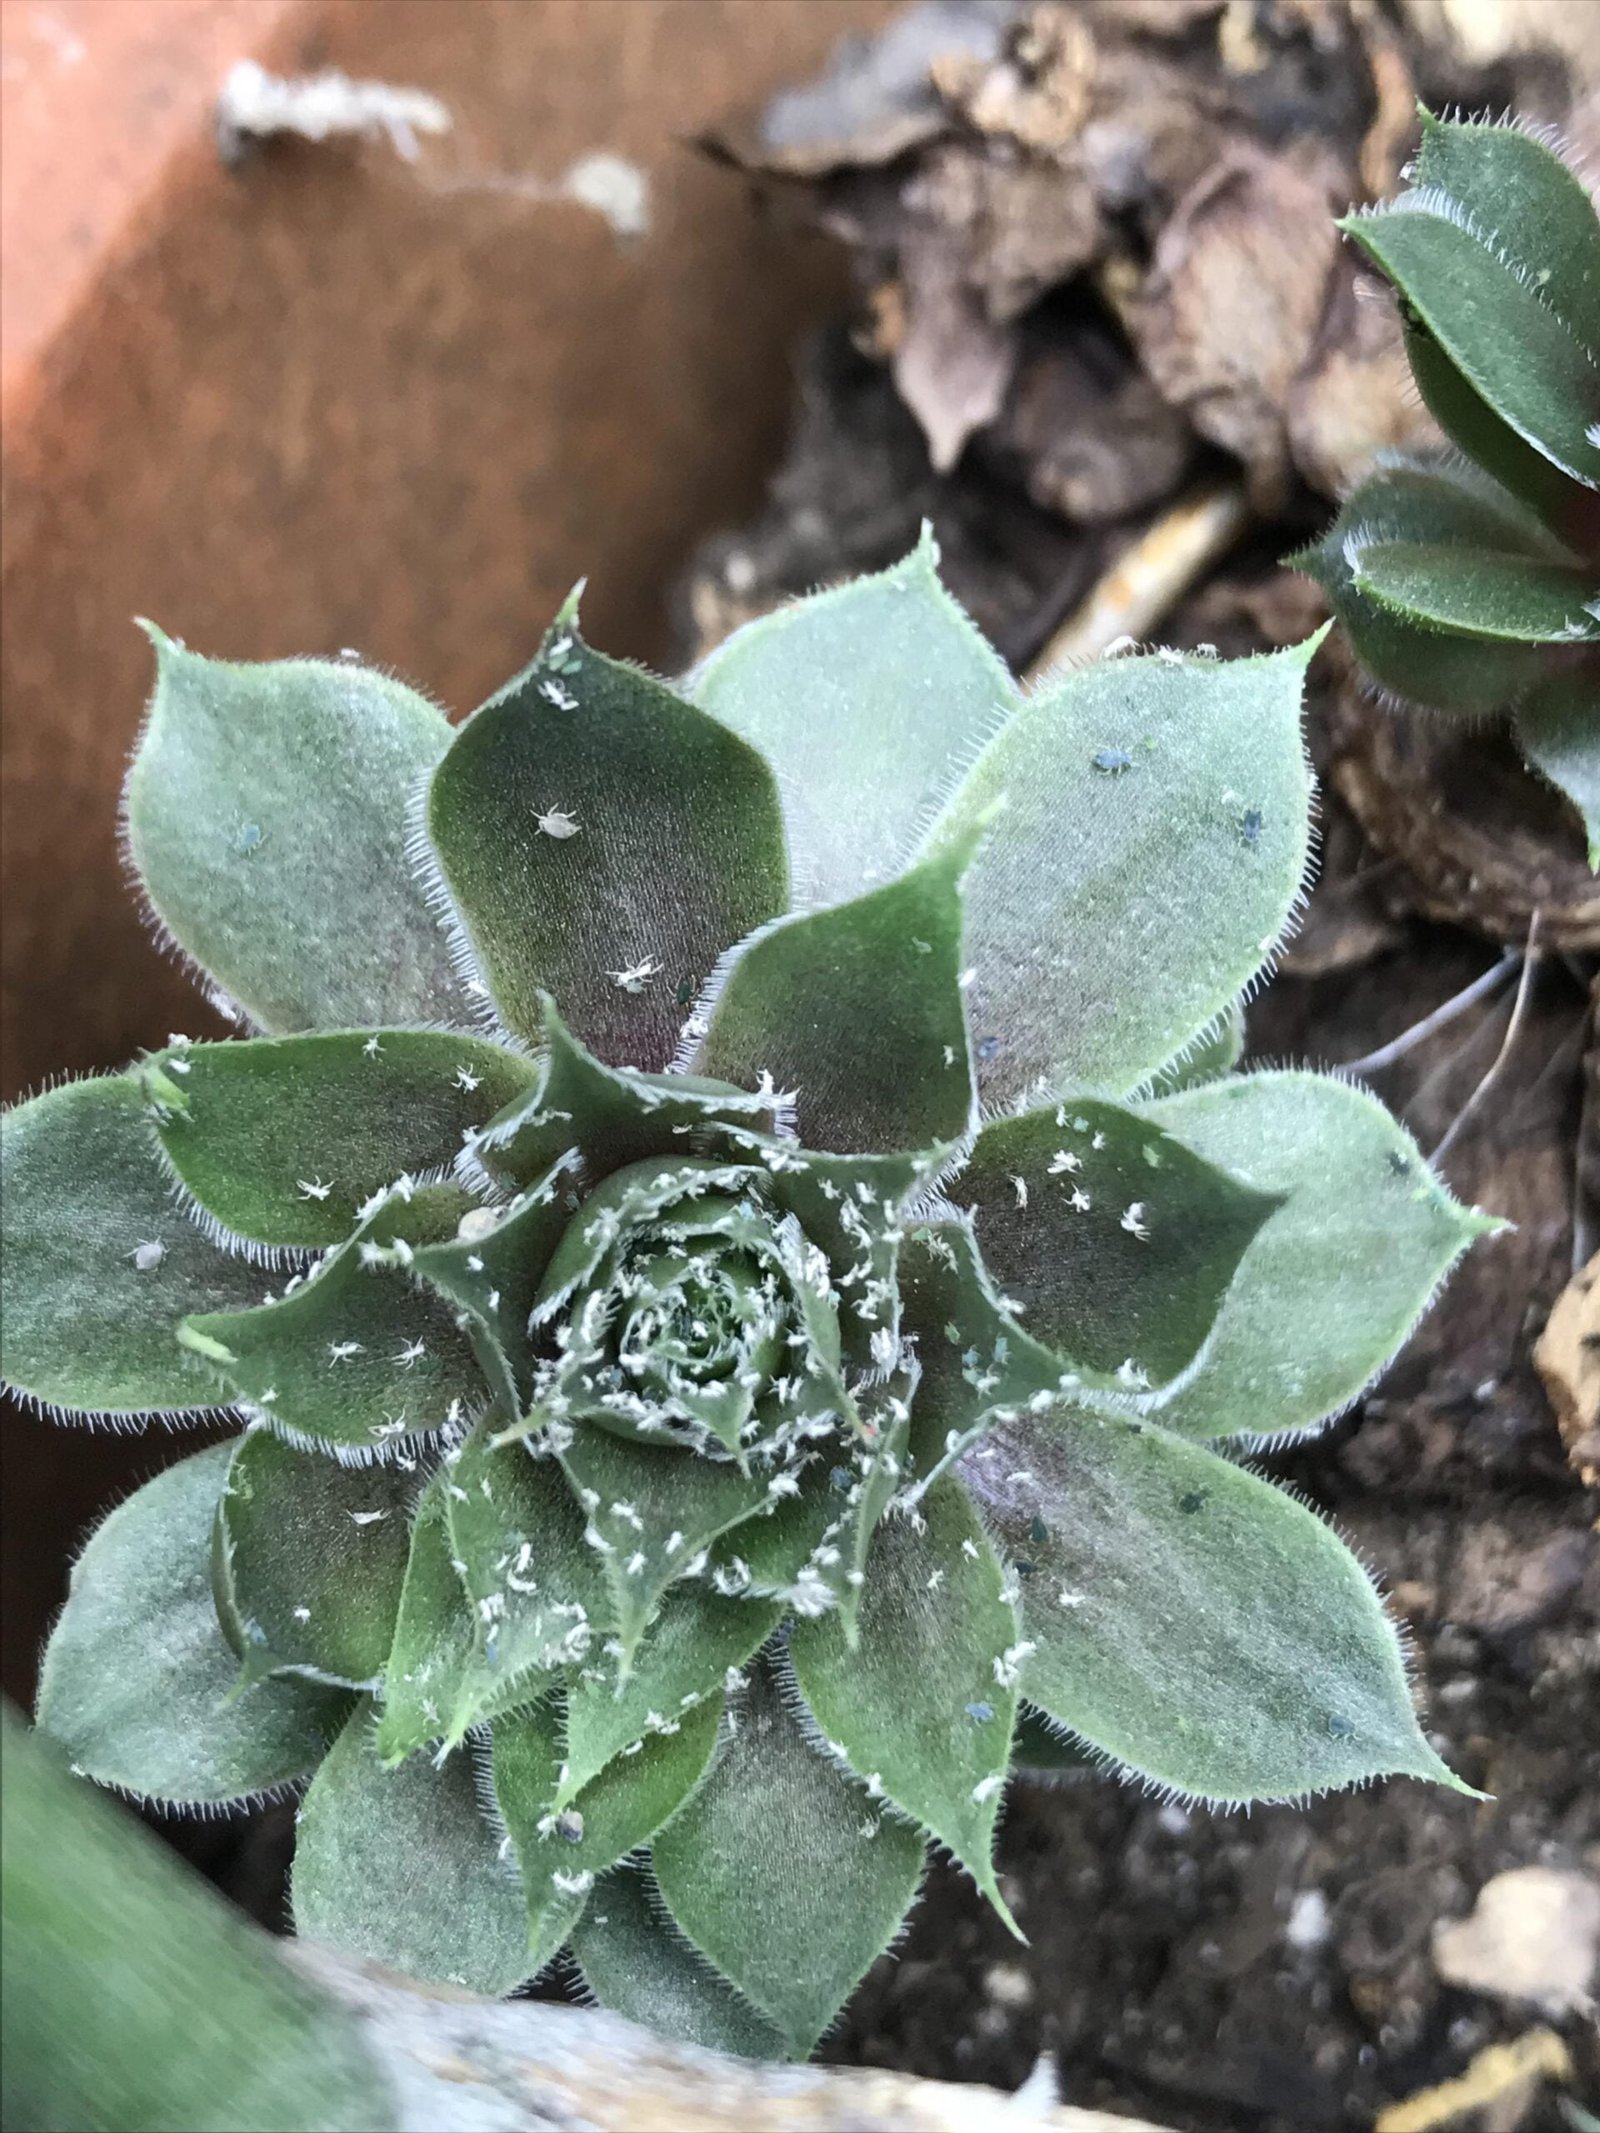  Easy Guide to Growing Charming Hens and Chicks Succulents